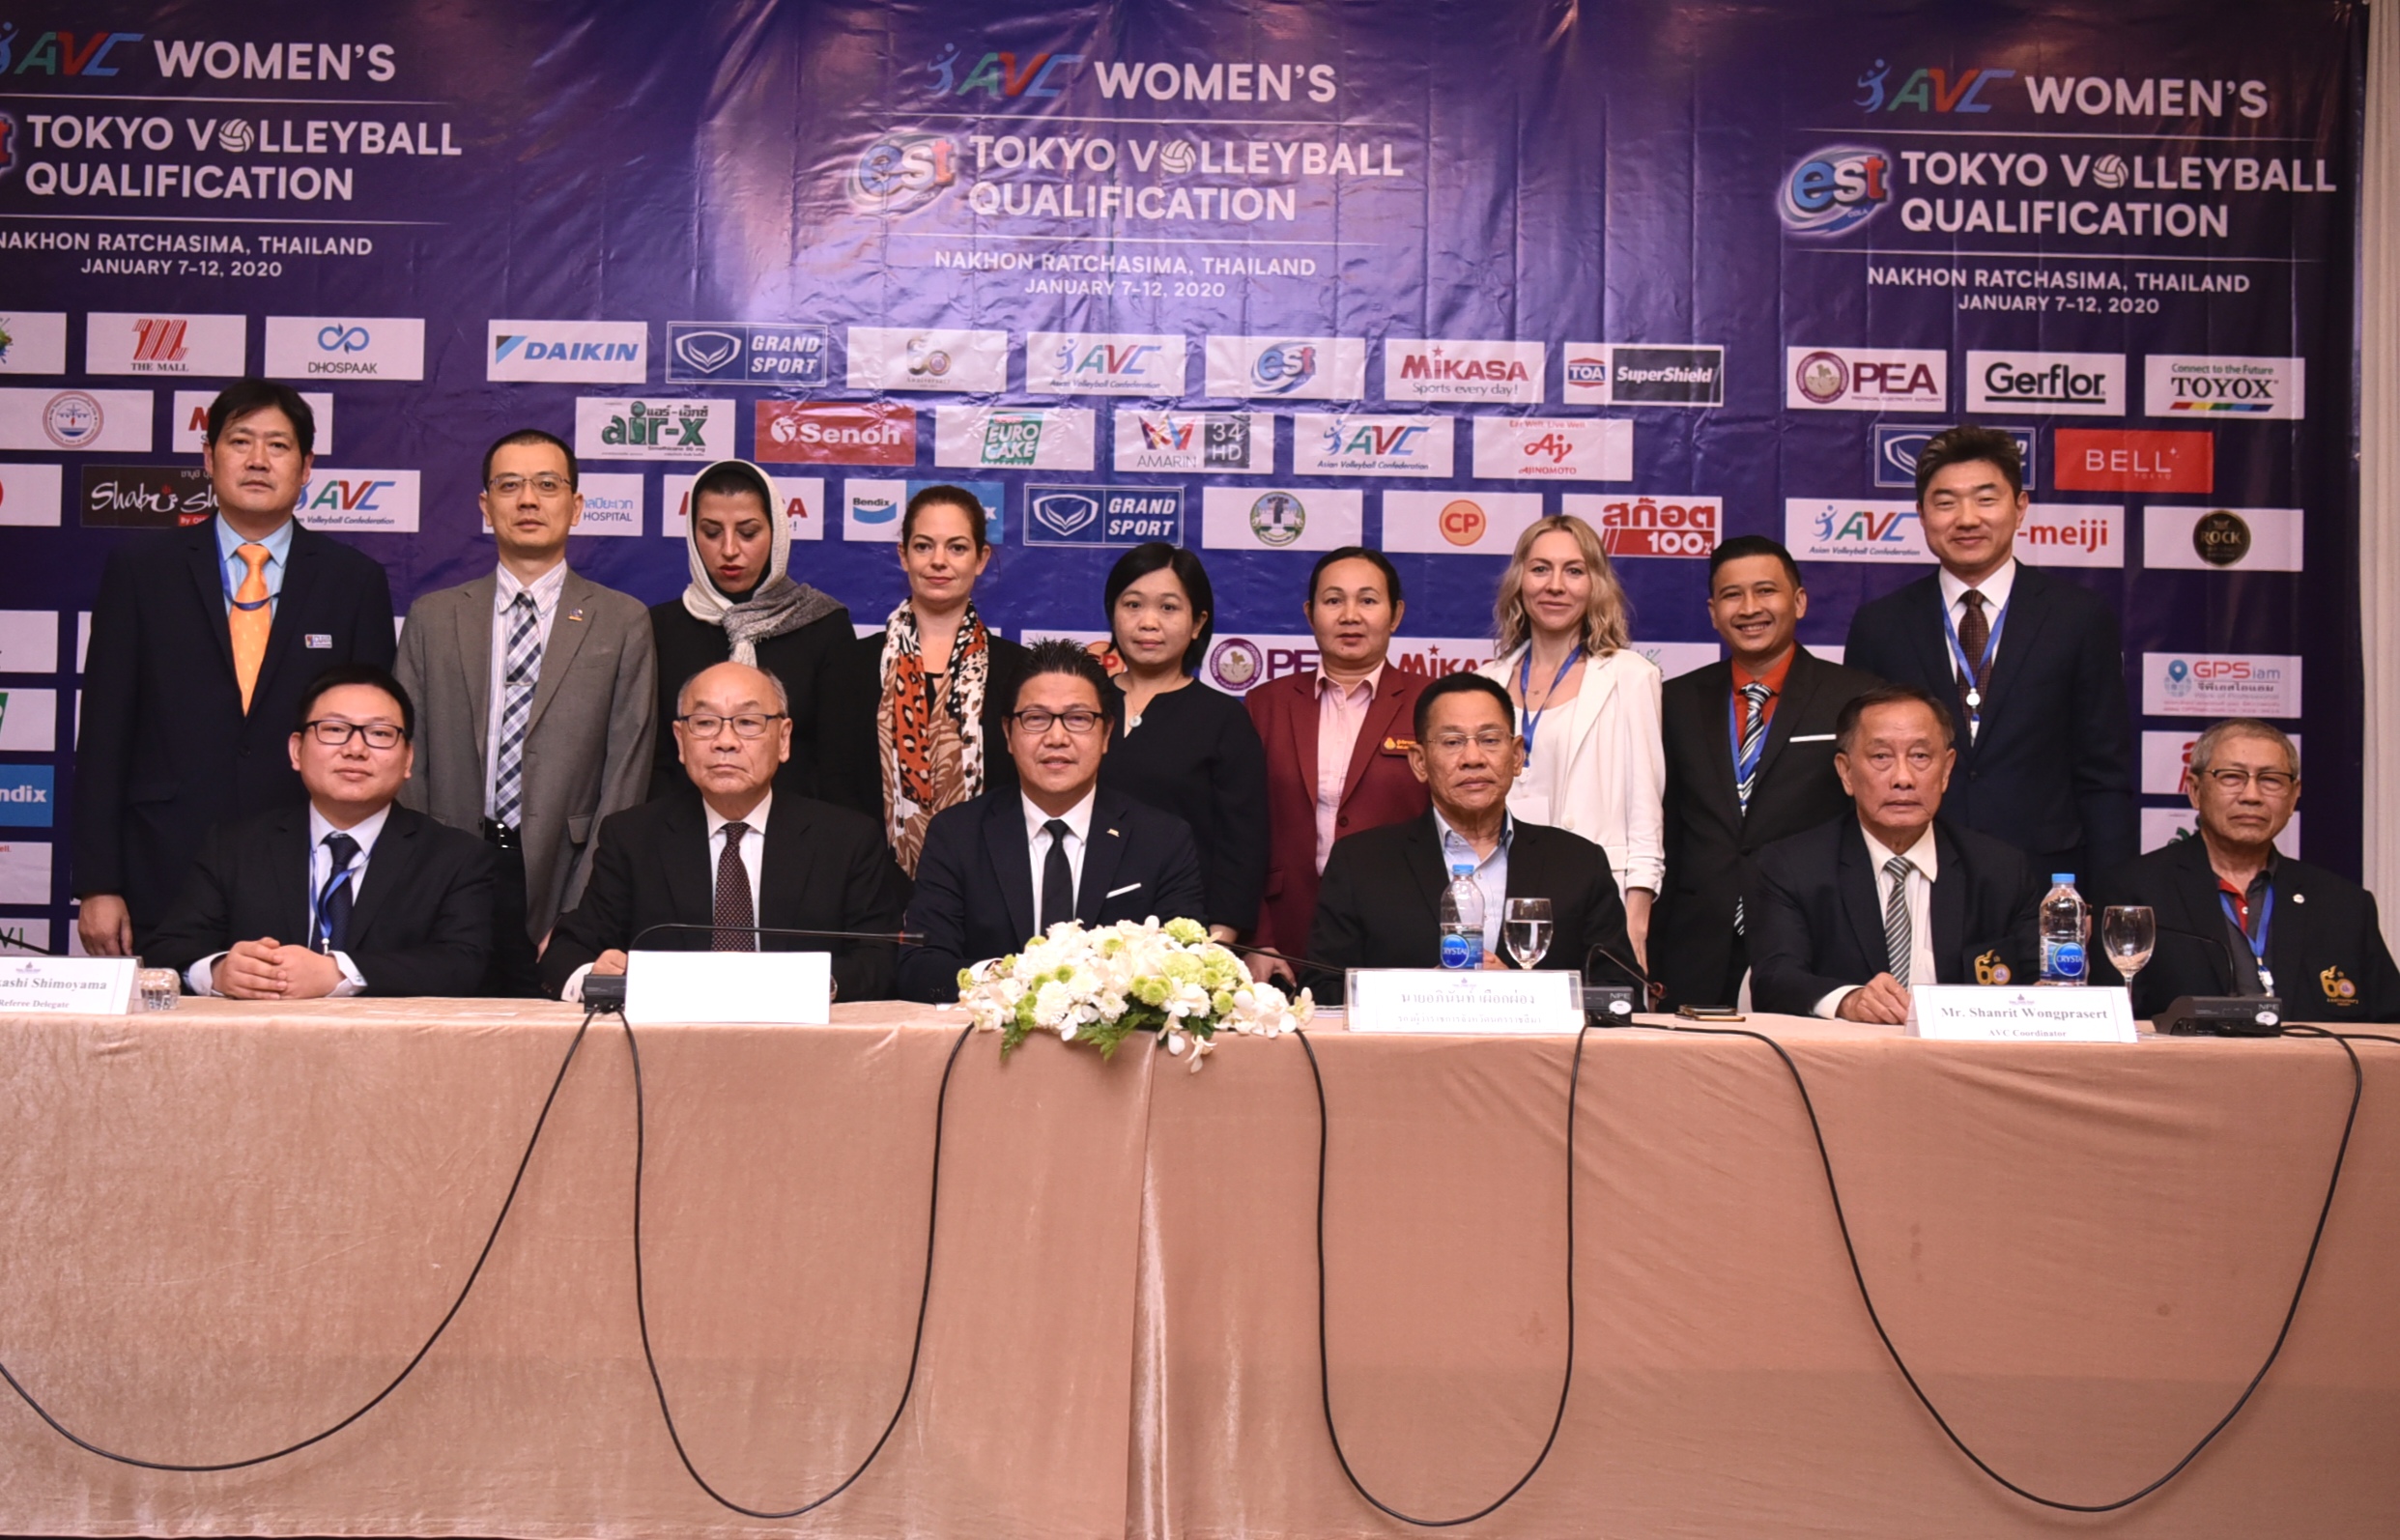 GTM TO CONFIRM READINESS FOR 2020 AVC WOMEN’S TOKYO VOLLEYBALL QUALIFICATION